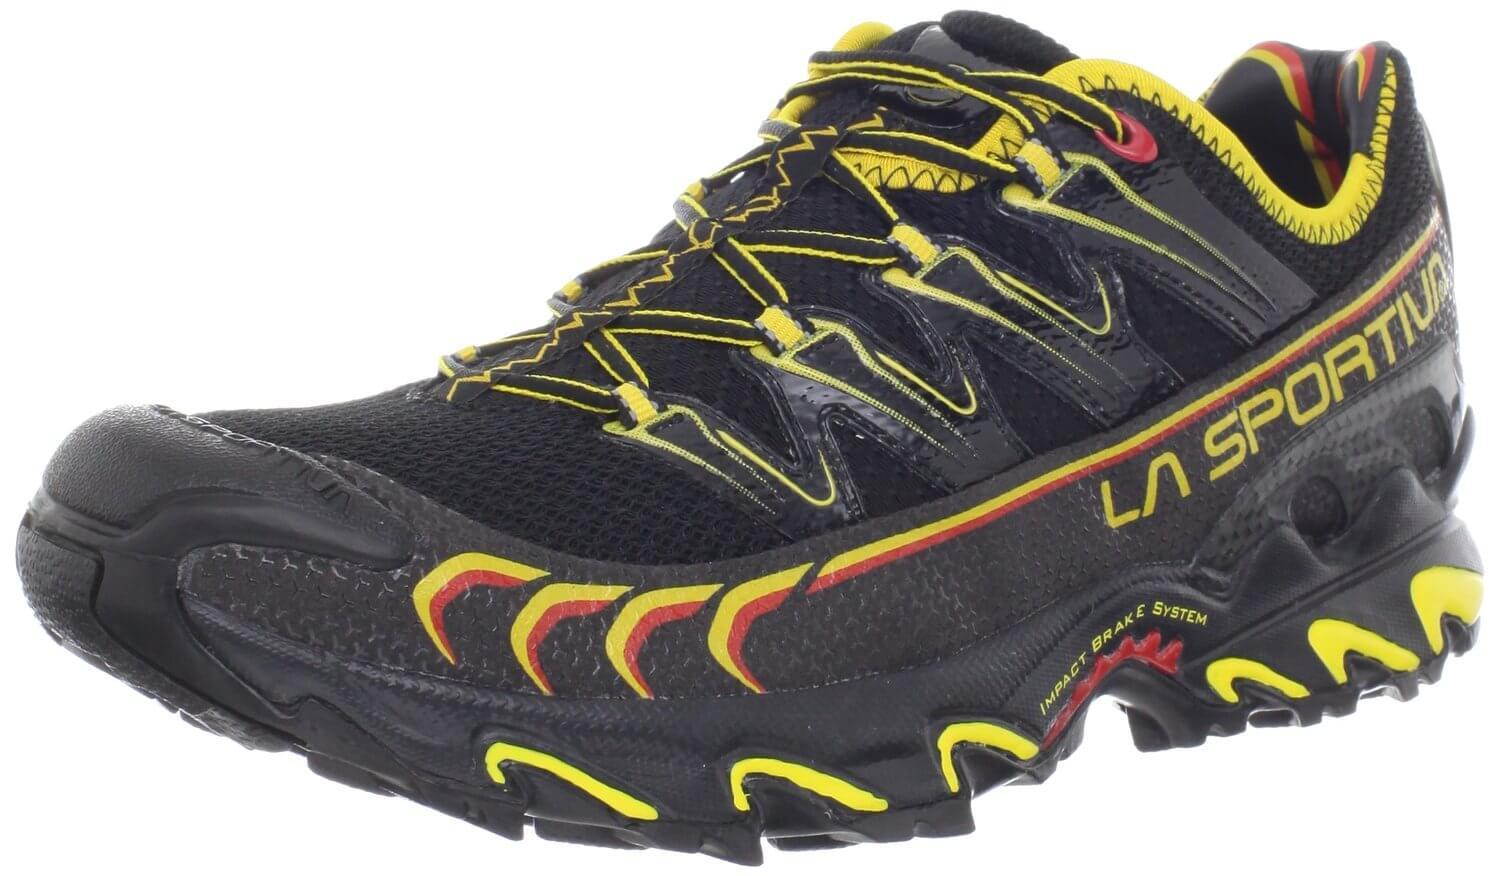 the La Sportiva Ultra Raptor shown from the front/side